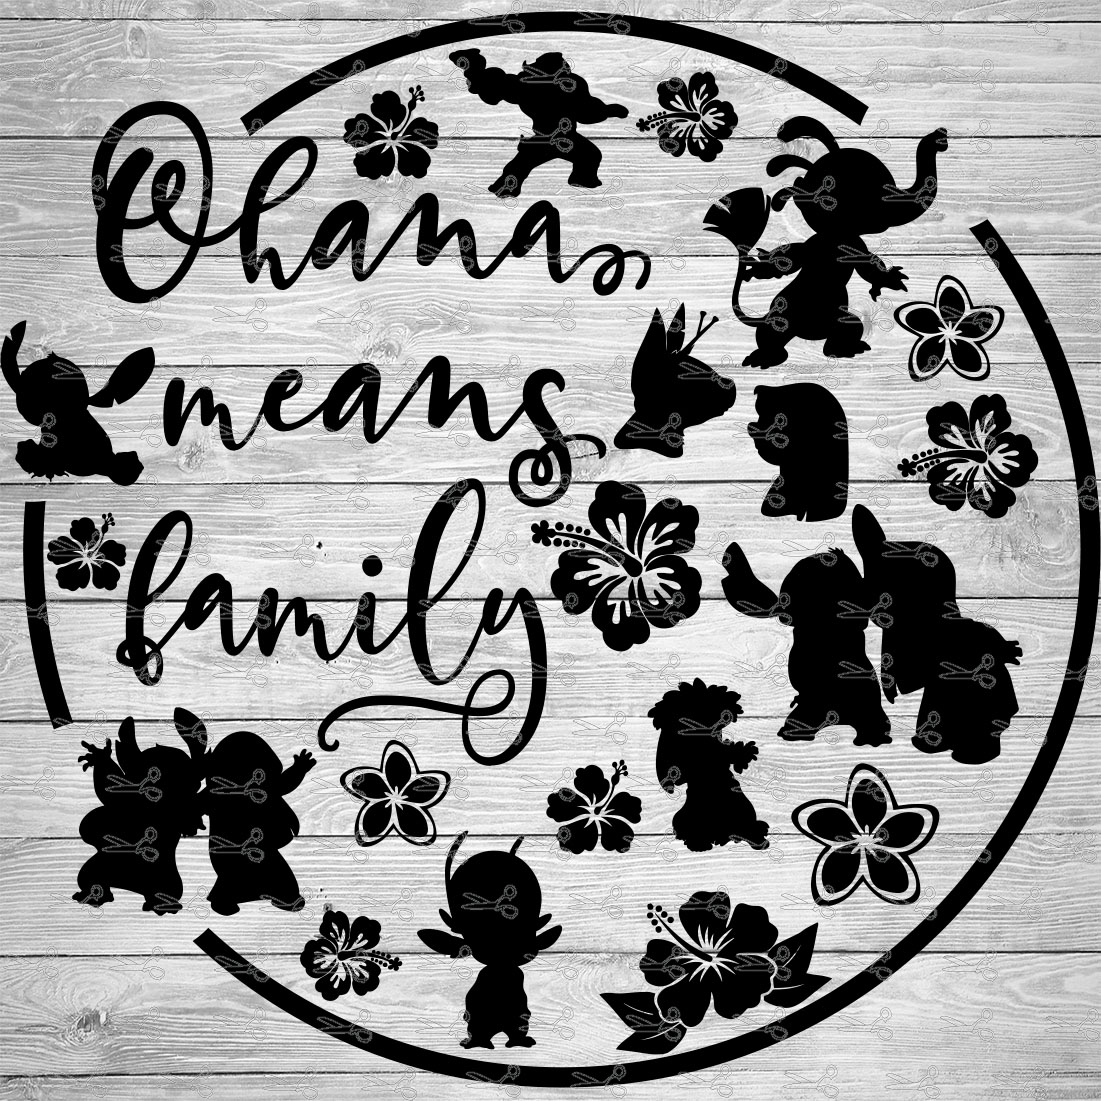 Download Ohana Means Family 2 Svg Eps Png Files Digital Download Files For Cricut Silhouette Cameo And More